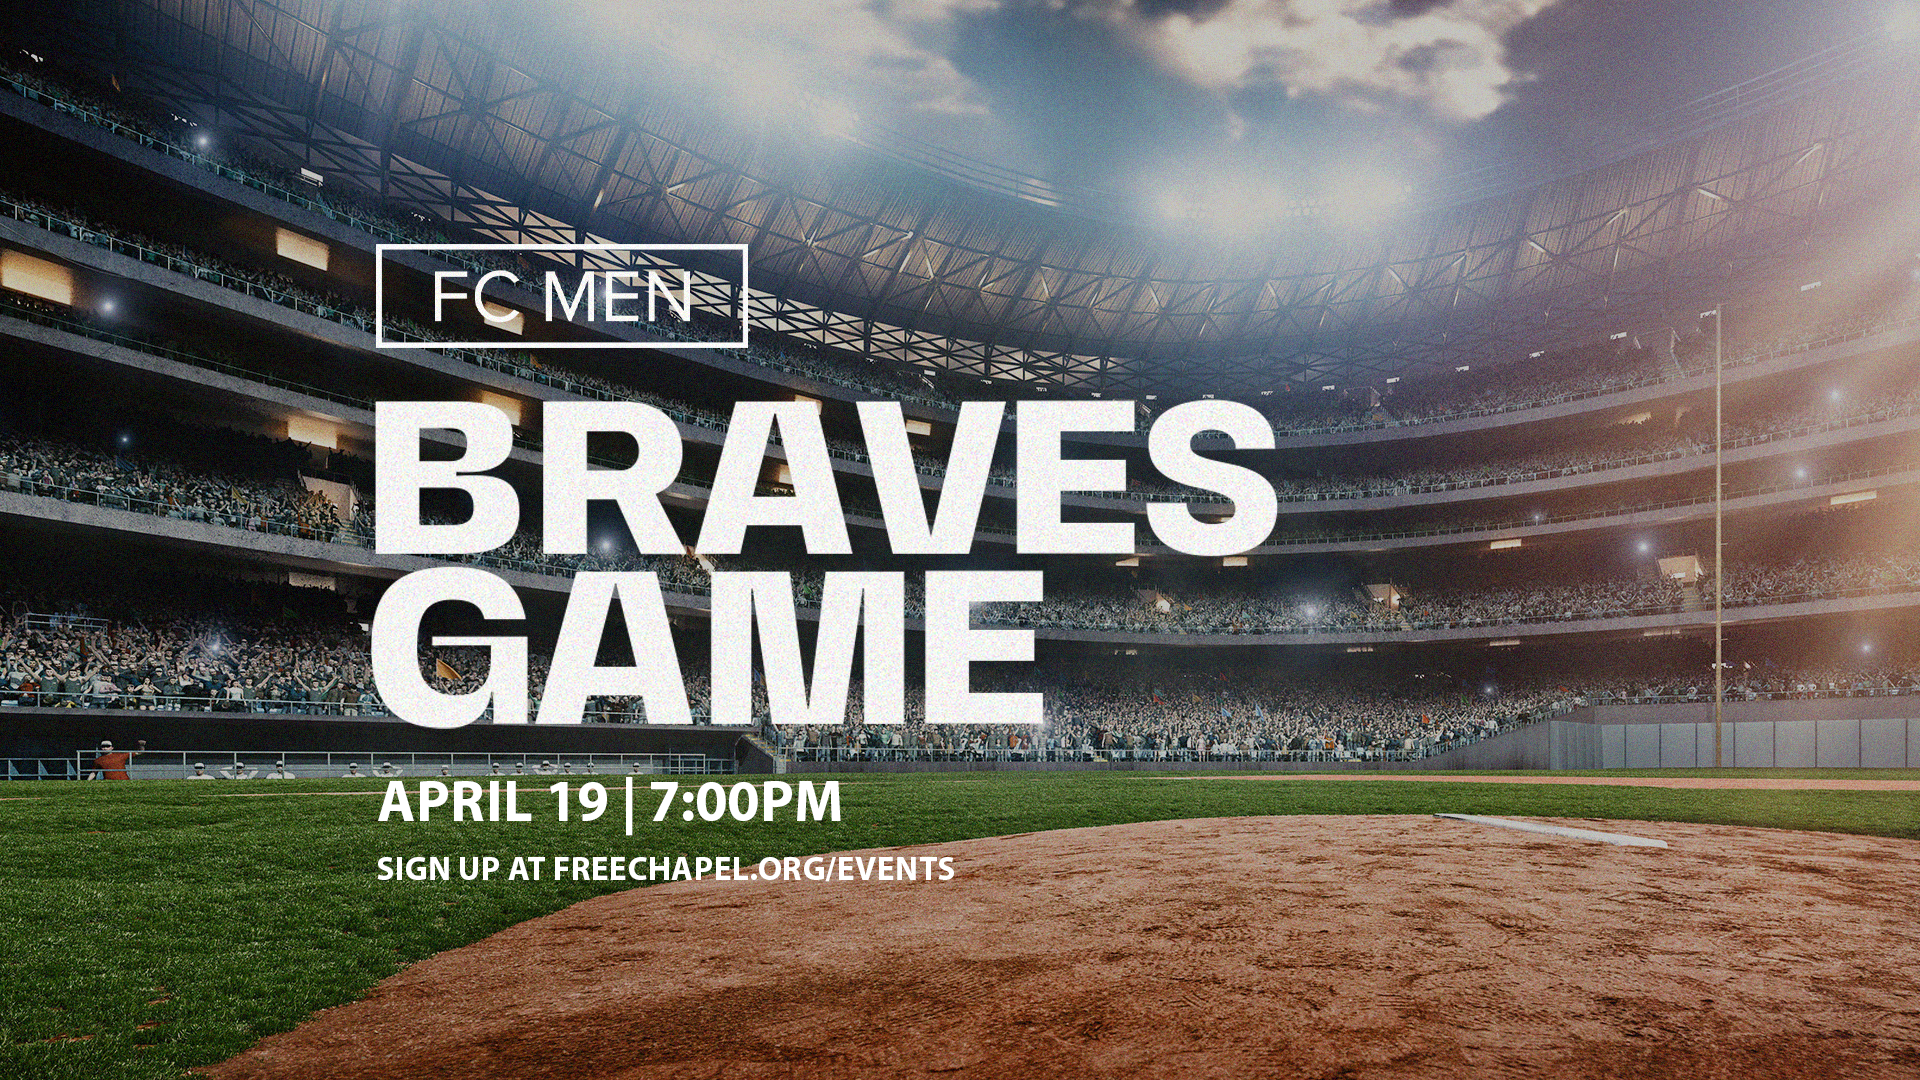 Men's Braves Game  at the Gainesville campus